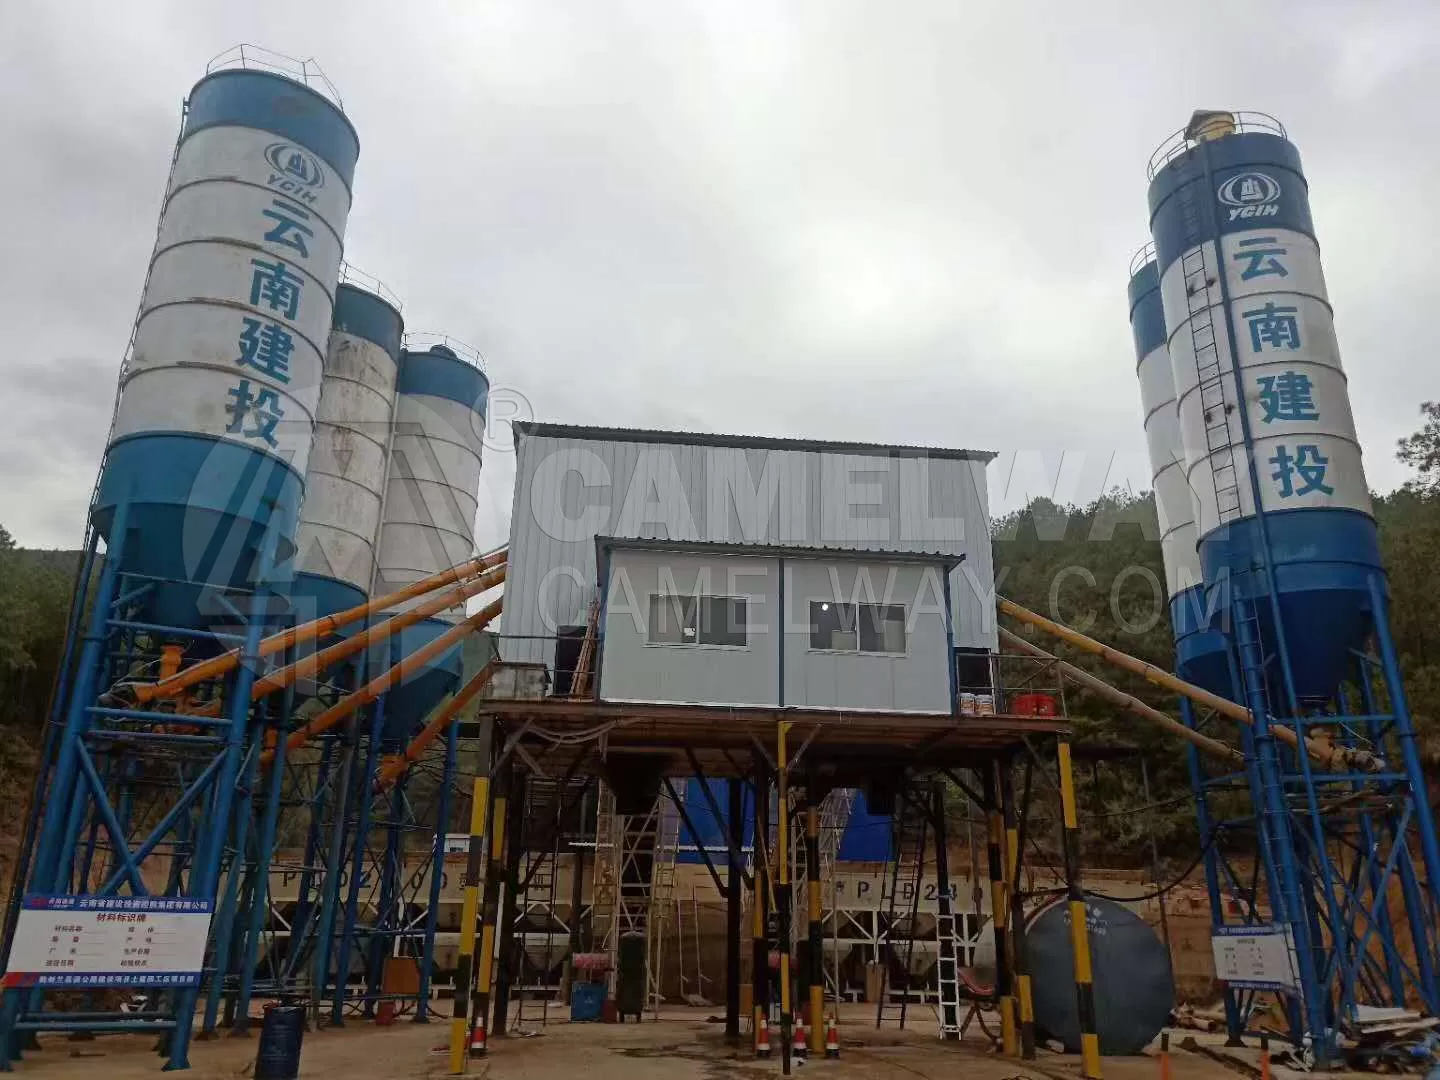 Stationary Concrete Mixing Plant